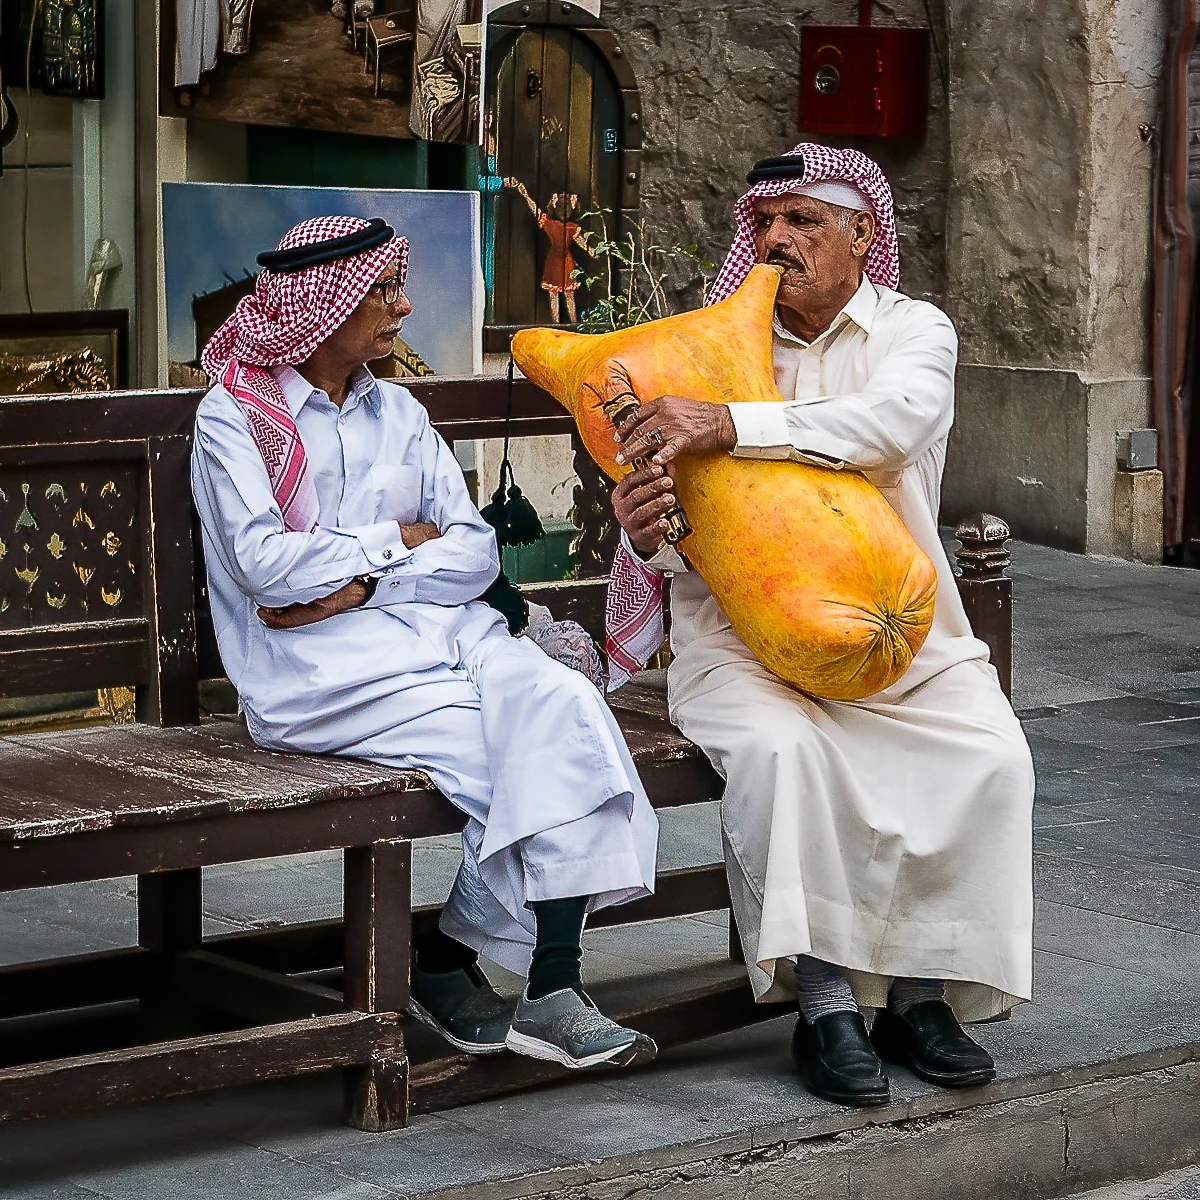 A man plays the bagpipes for an unimpressed onlooker in Doha. Taken by David Uffindall